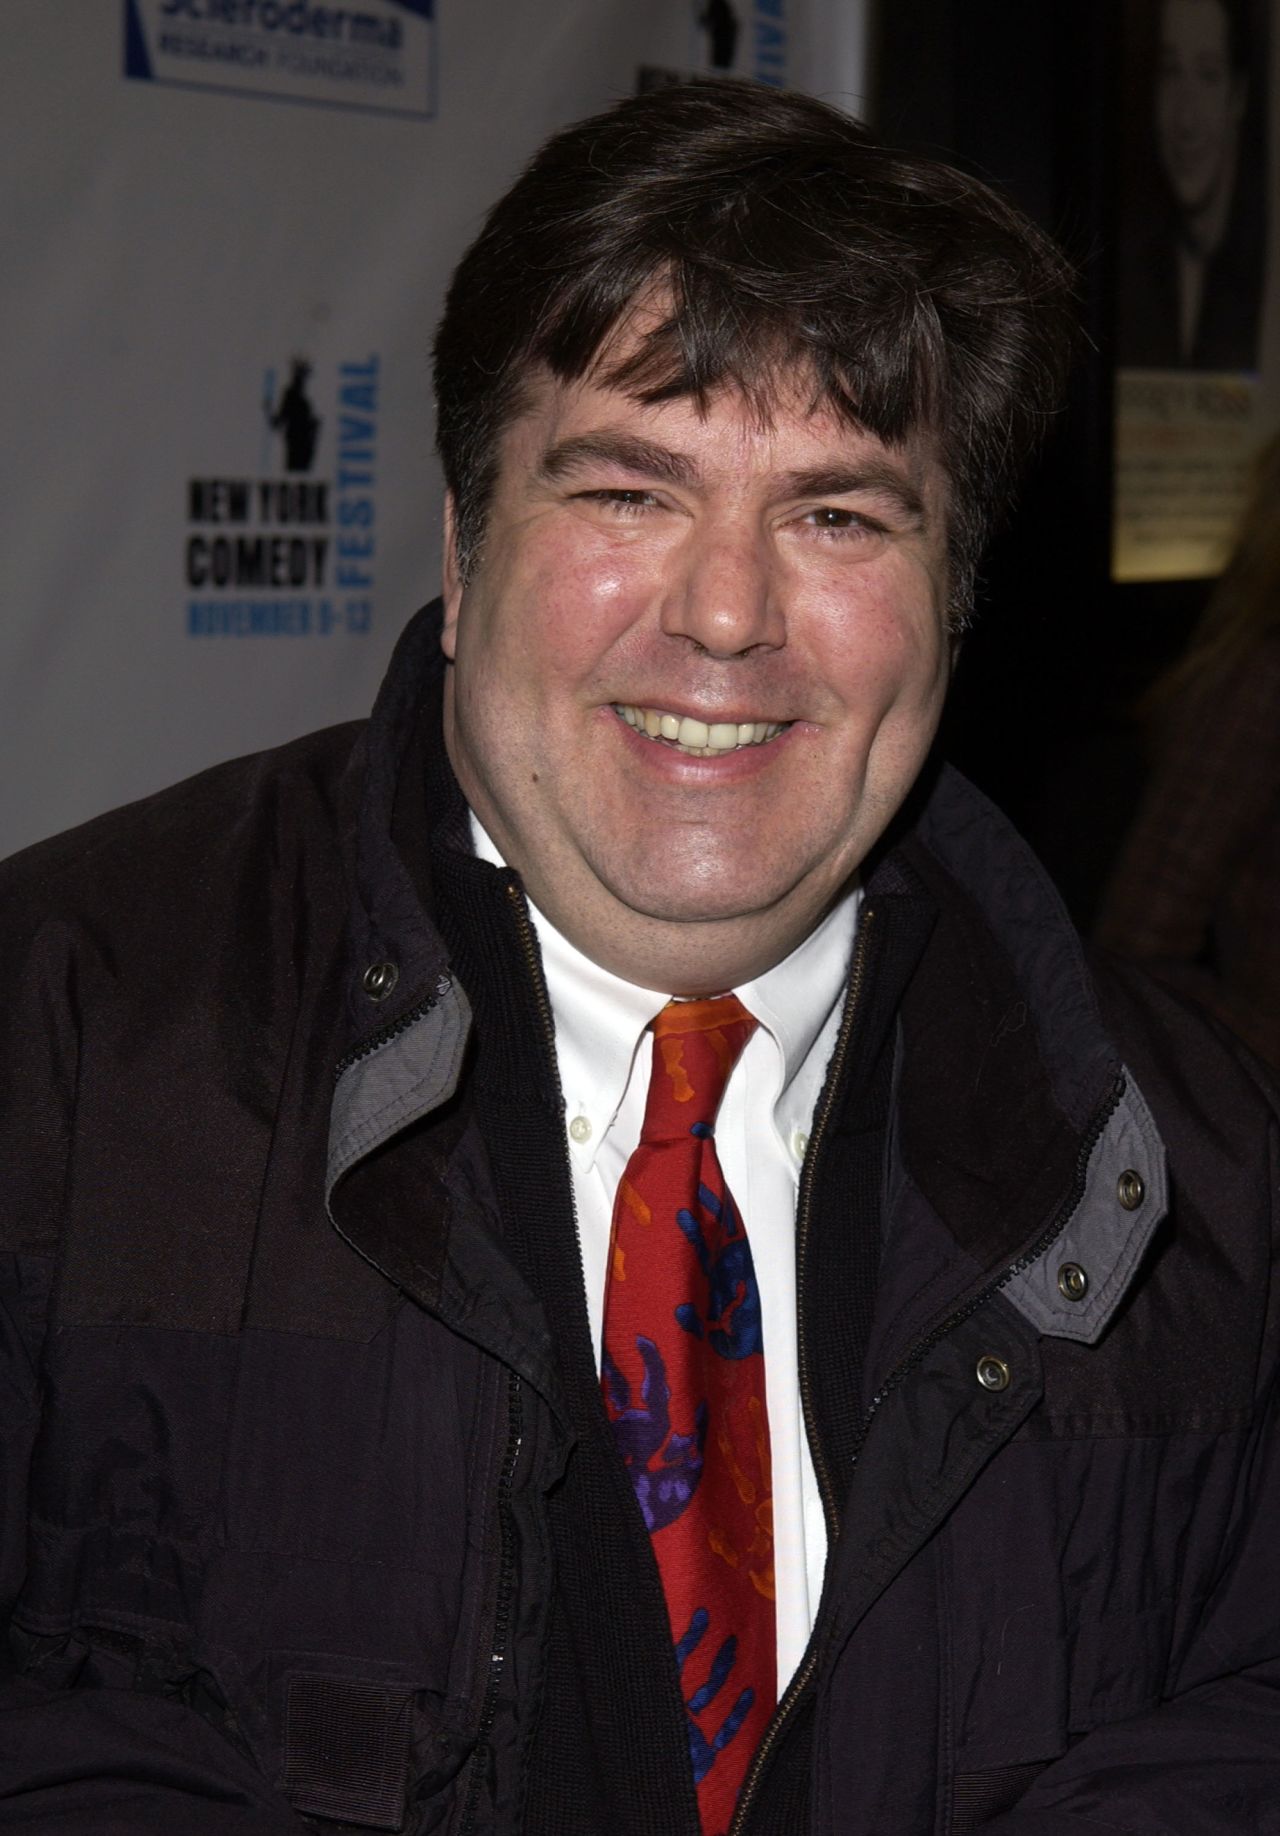 Actor and comedian <a href="http://www.cnn.com/2016/10/21/entertainment/kevin-meaney-comedian-obit/index.html" target="_blank">Kevin Meaney</a>, who had been a regular on late-night TV and was famous for delivering the line, "That's not right," died, his agent said October 21. Meaney's age and the cause of death weren't immediately known.